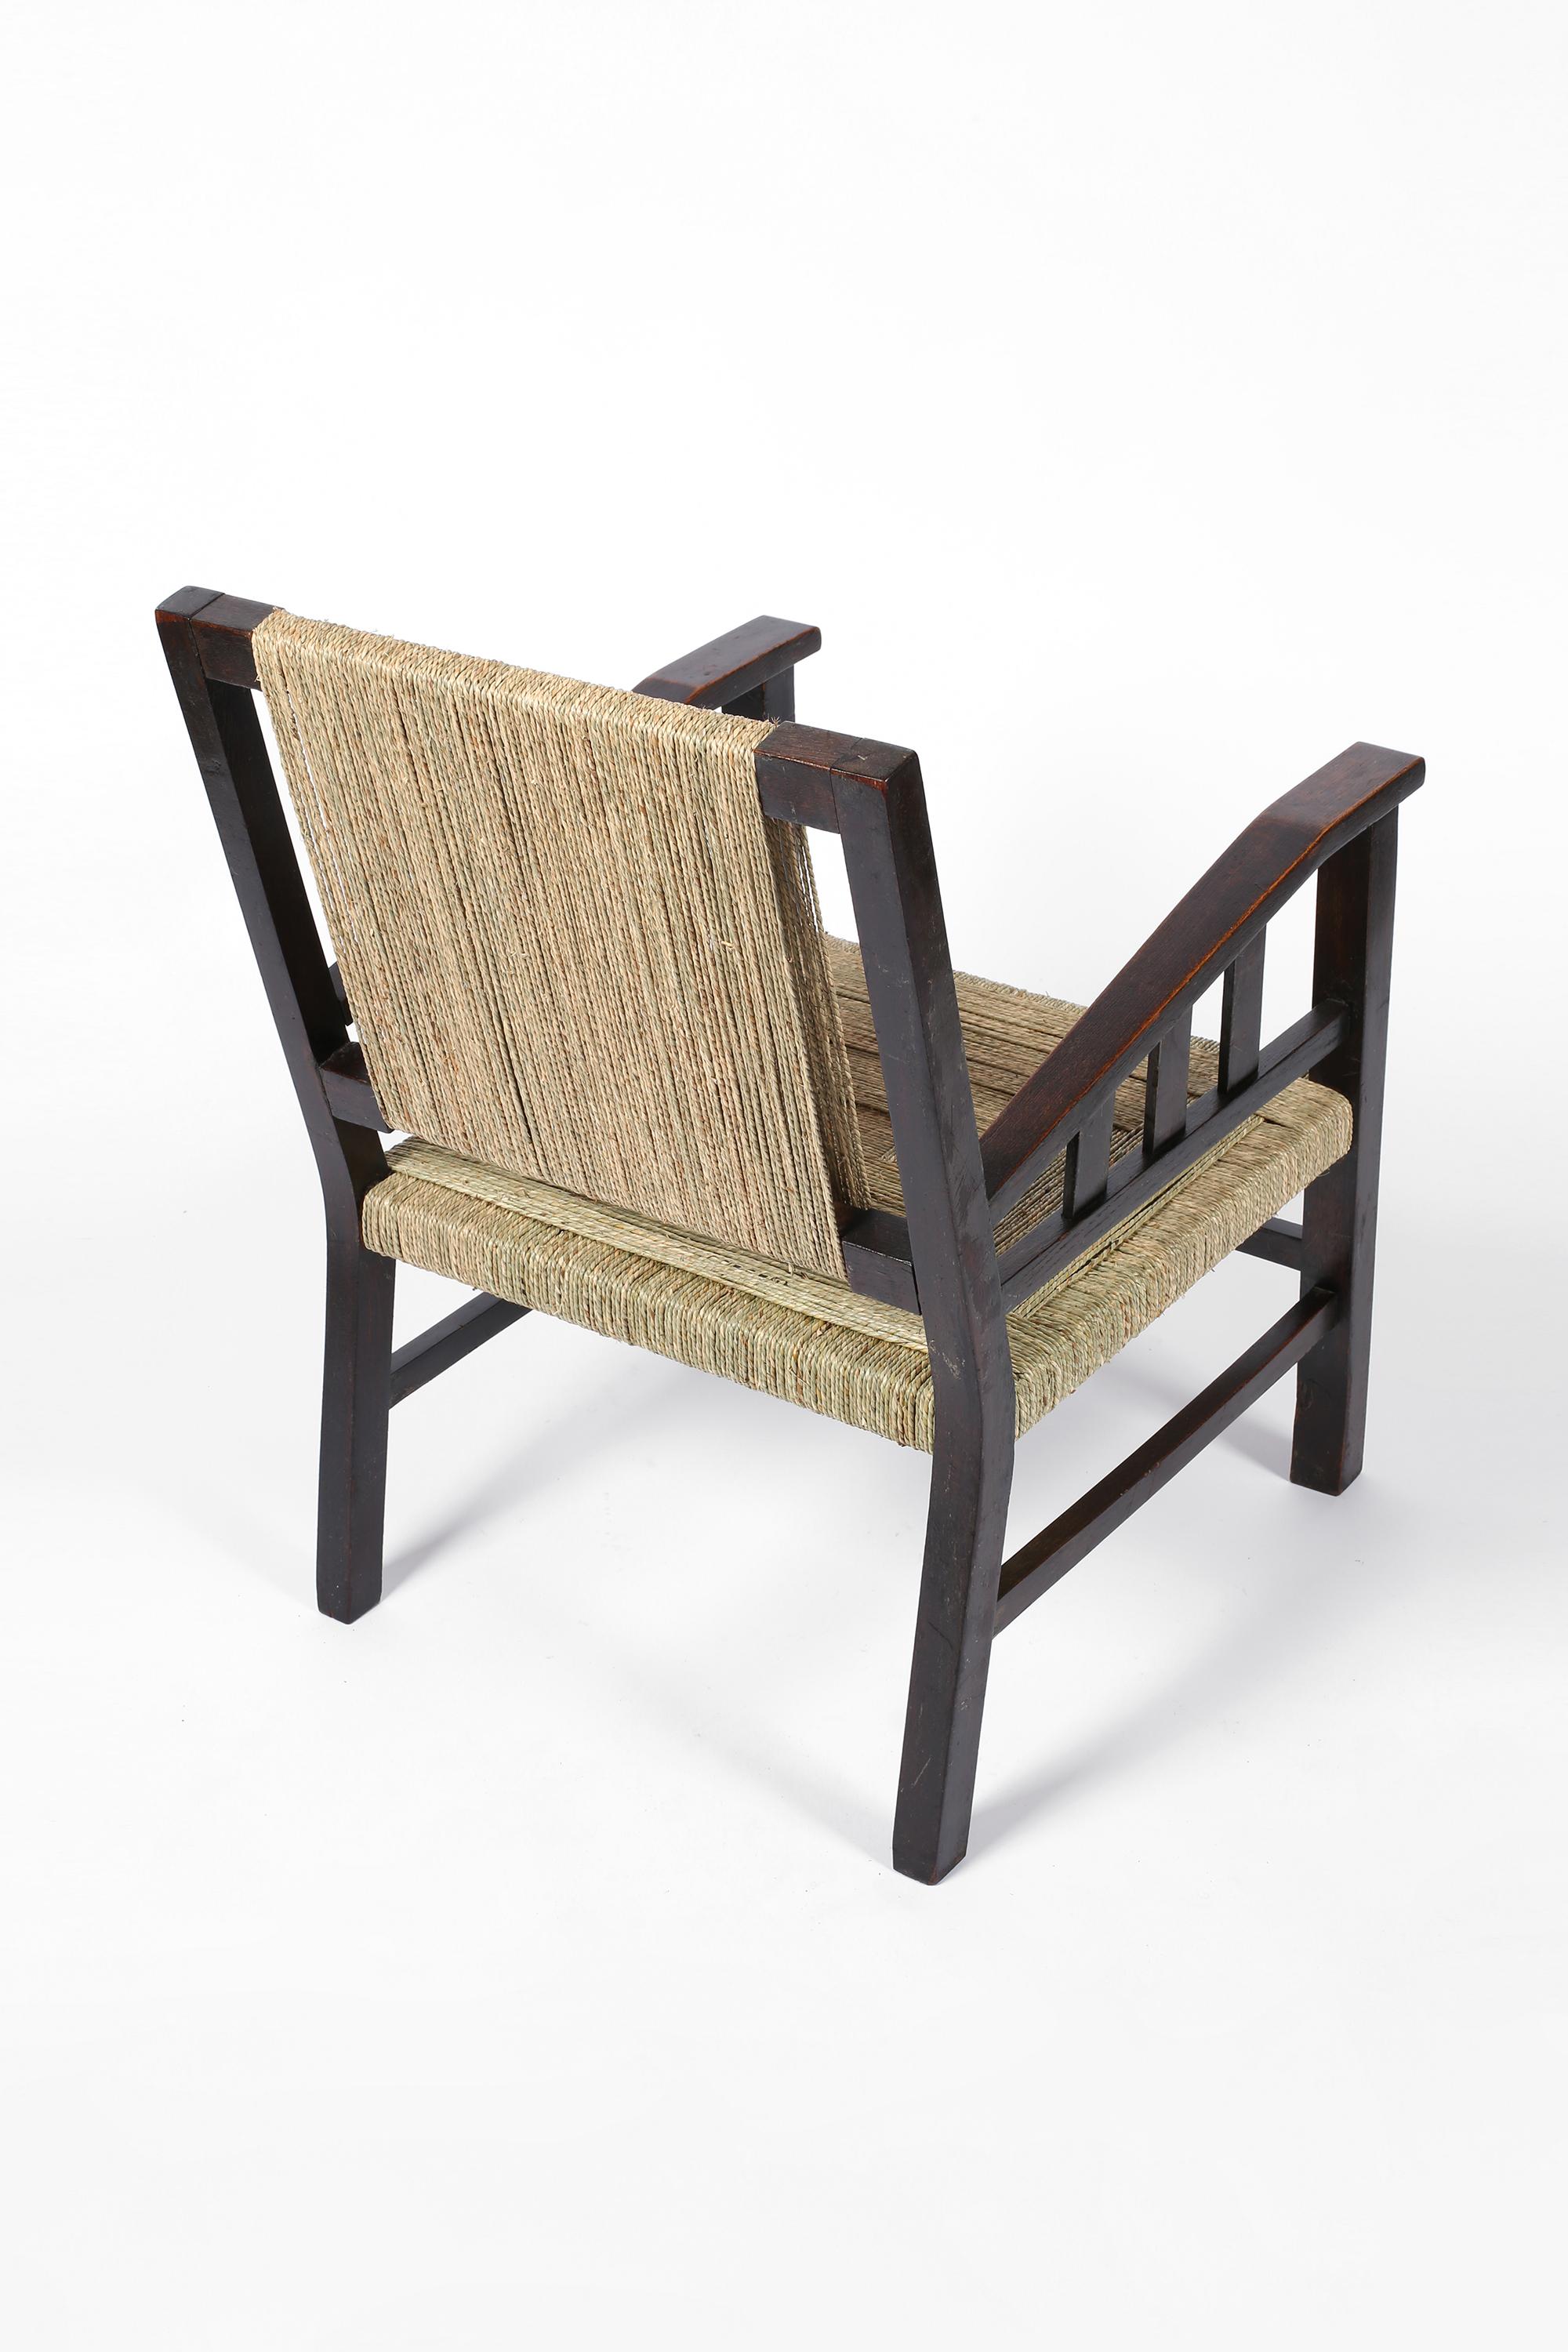 Seagrass 1930s French Modernist Art Deco Armchair by Francis Jourdain in Beech and Rope